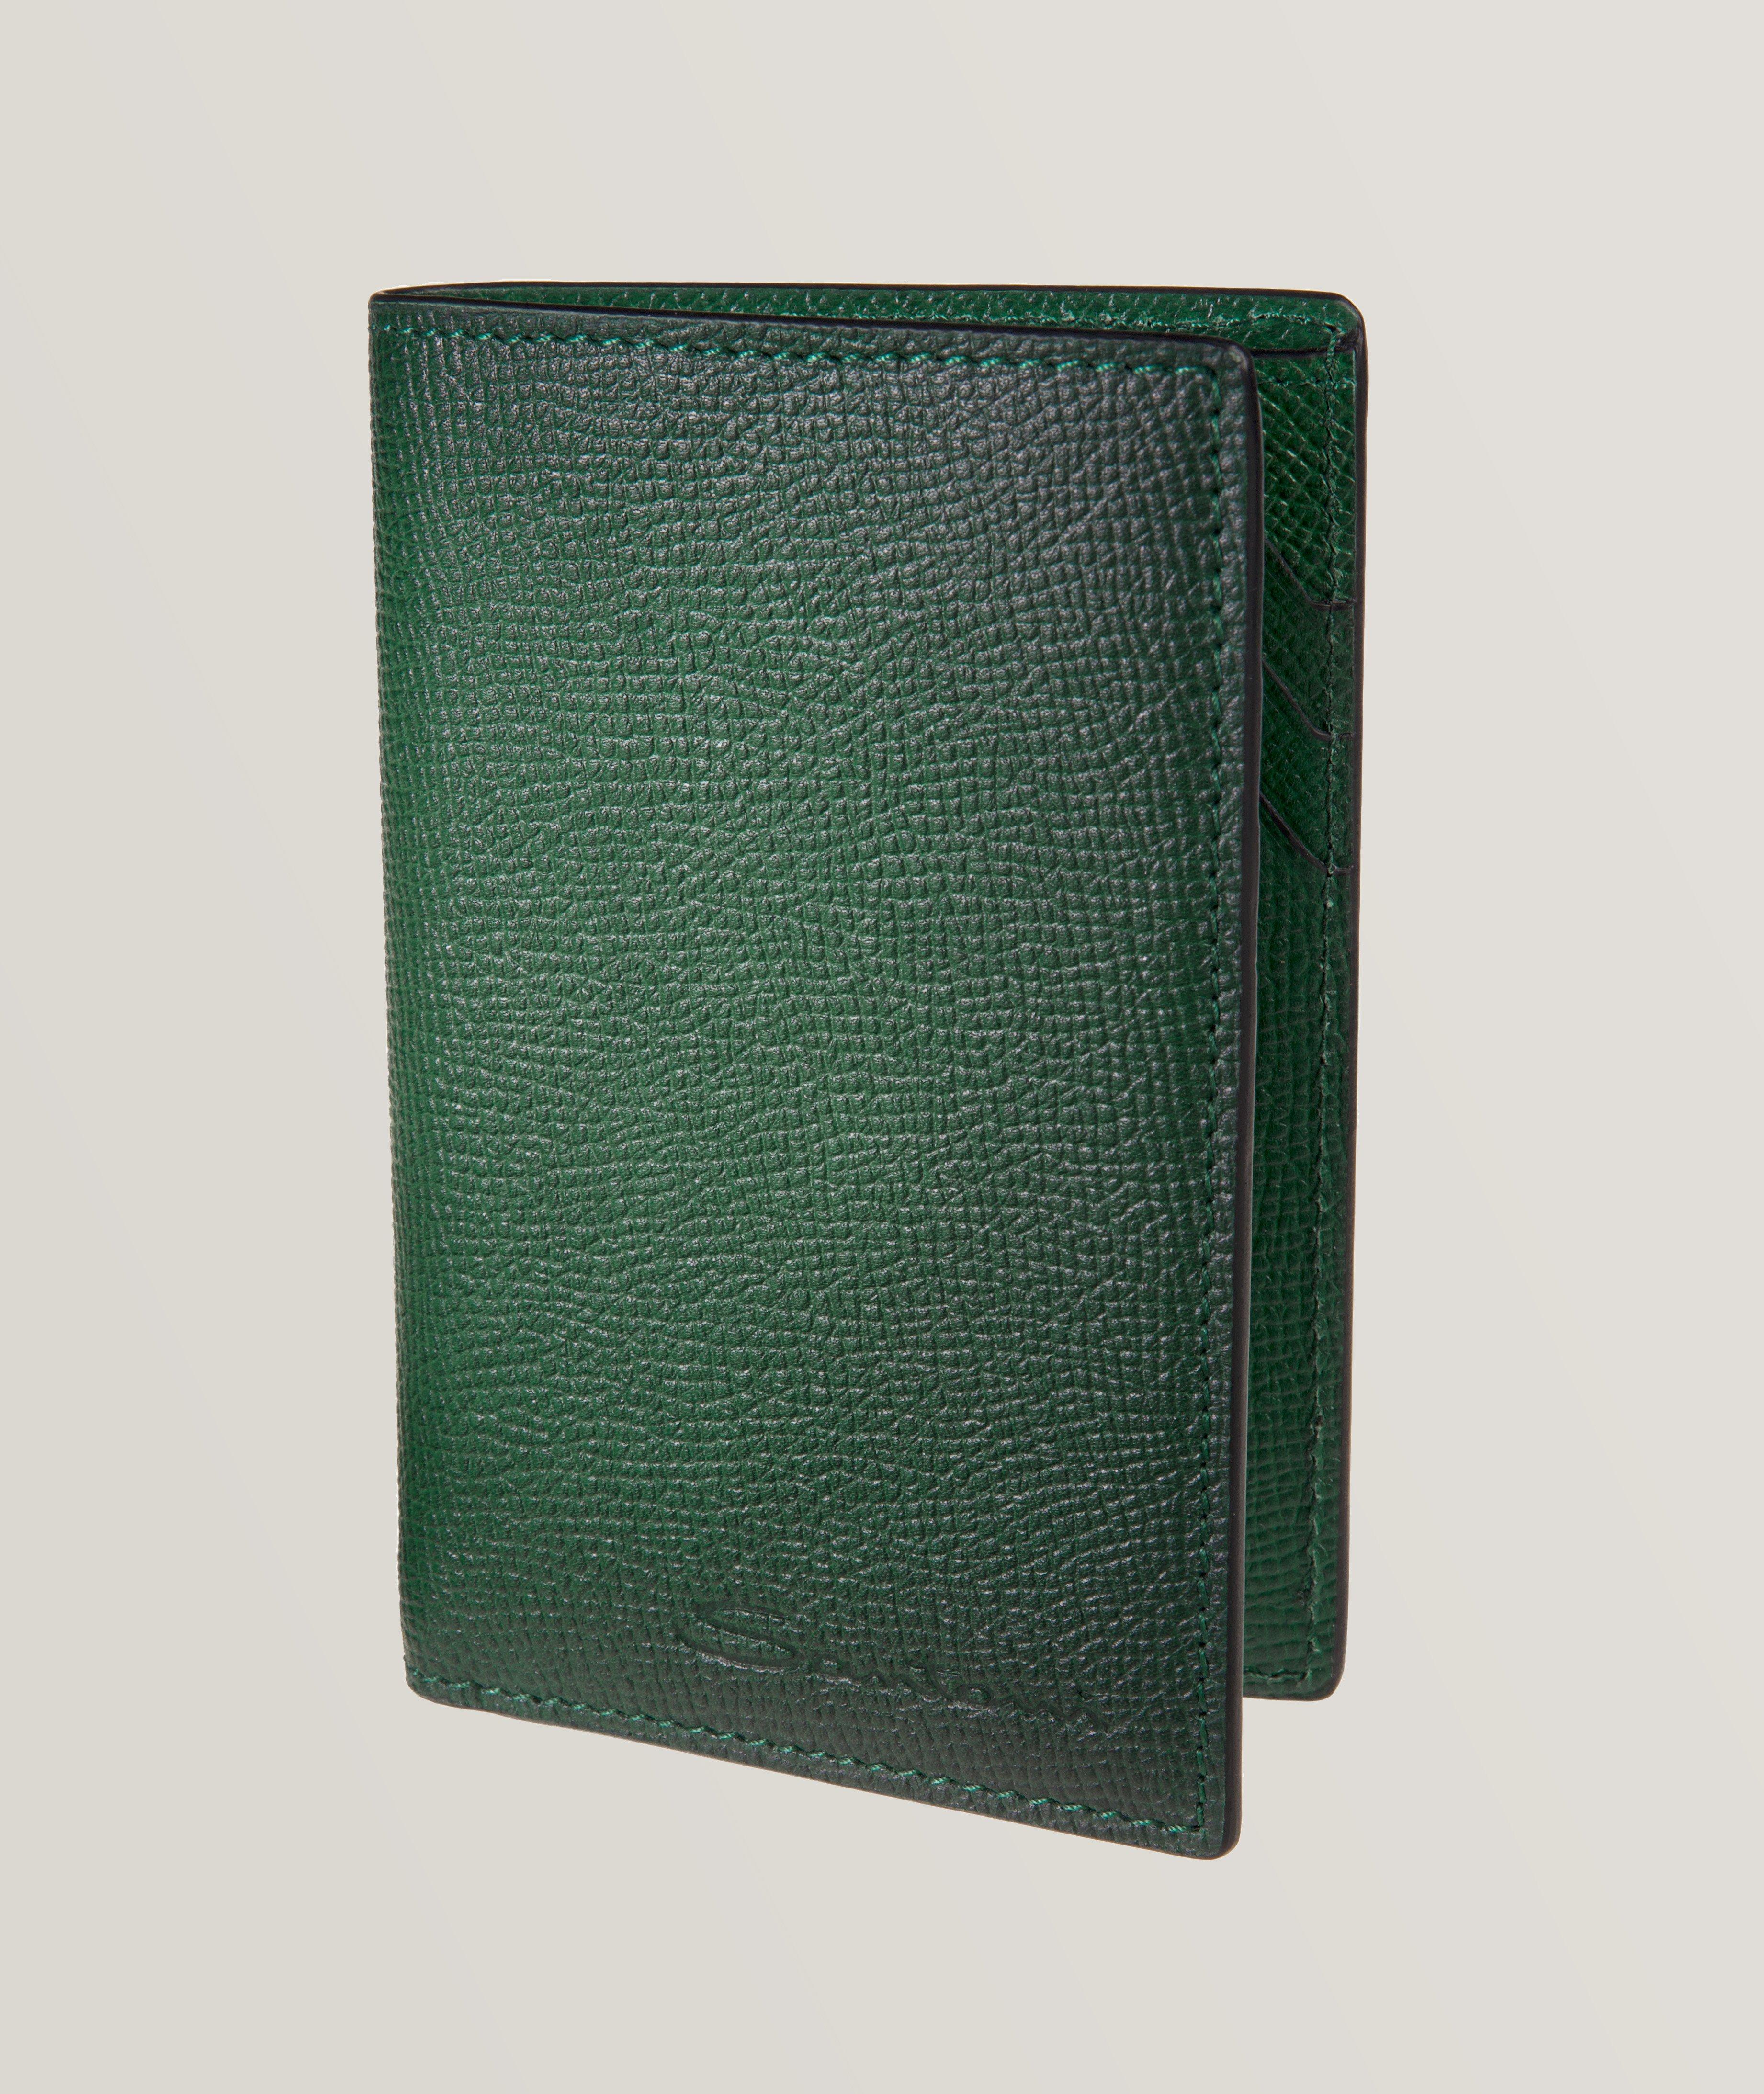 Air Burnished Grain Leather Vertical Card Case image 0